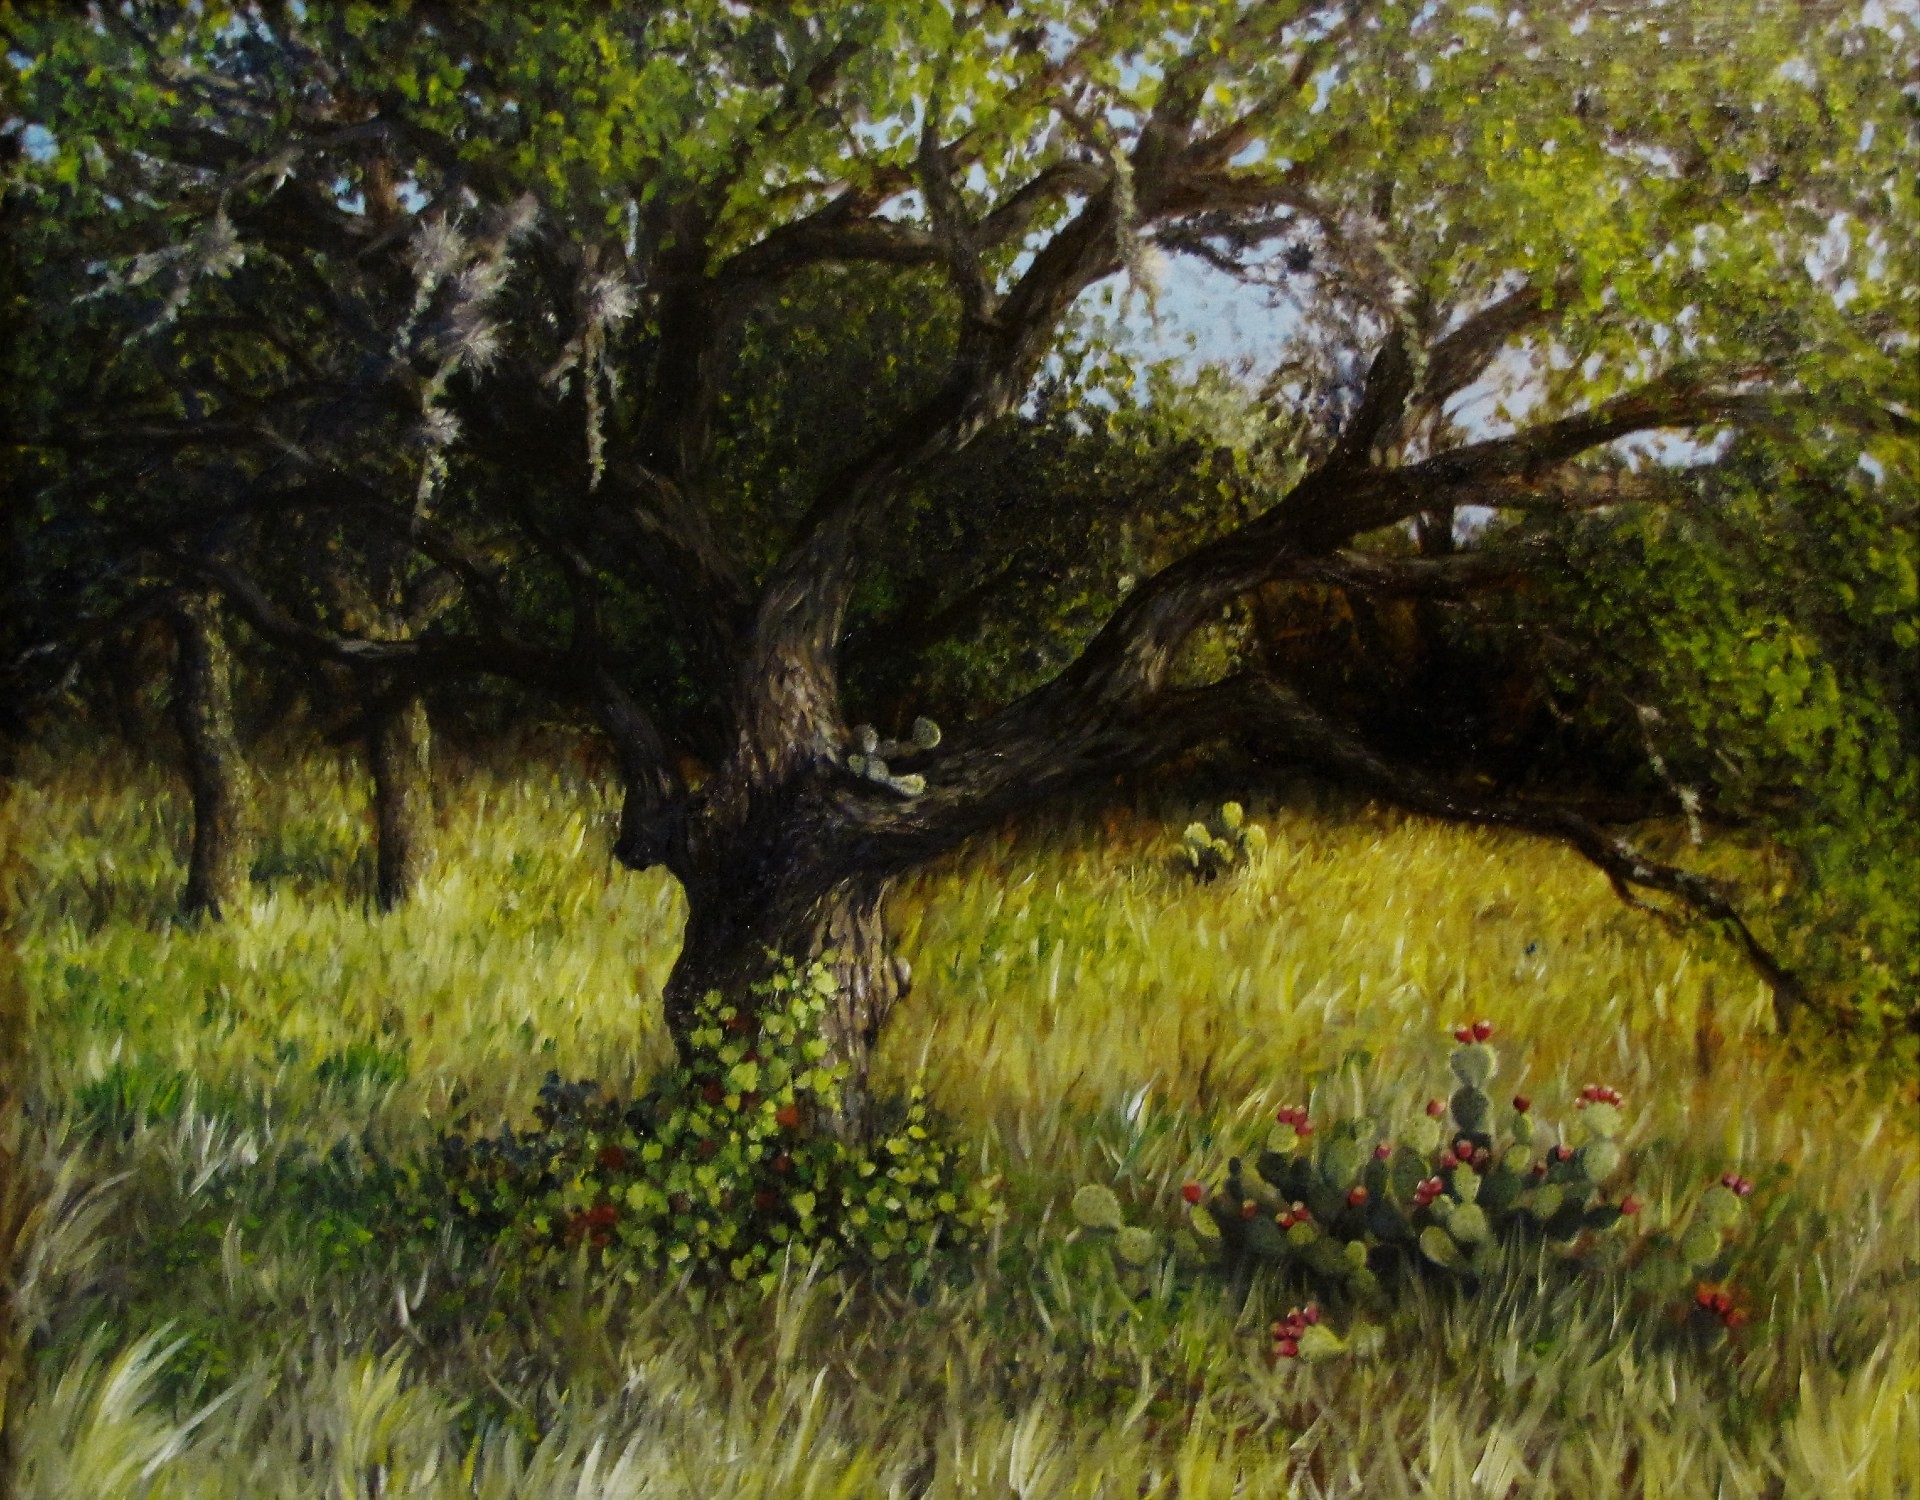 PleinAir Magazine's 12th Annual PleinAir Salon July 2022 Top 100 Victoria Ermler Live Oak with Cactus in the Late Afternoon Landscape